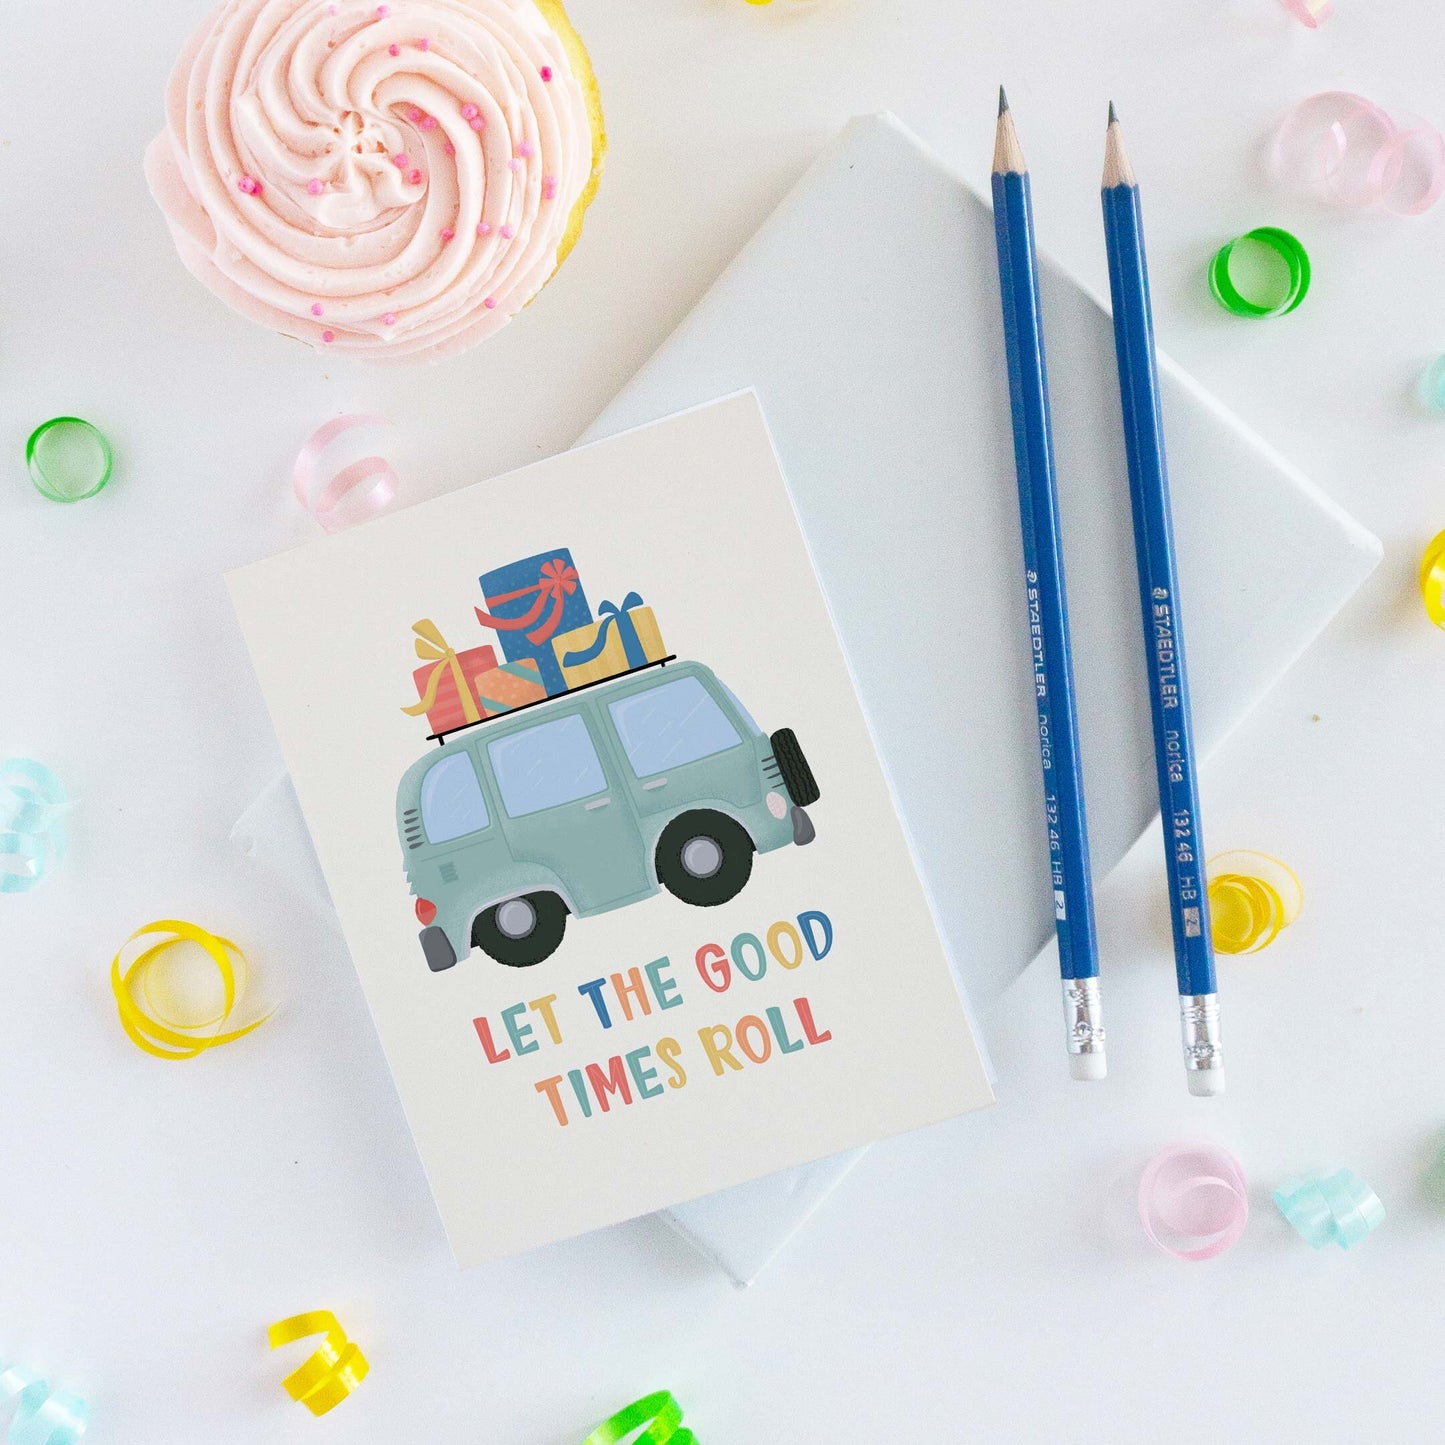 Let the Good Times Roll Birthday Card